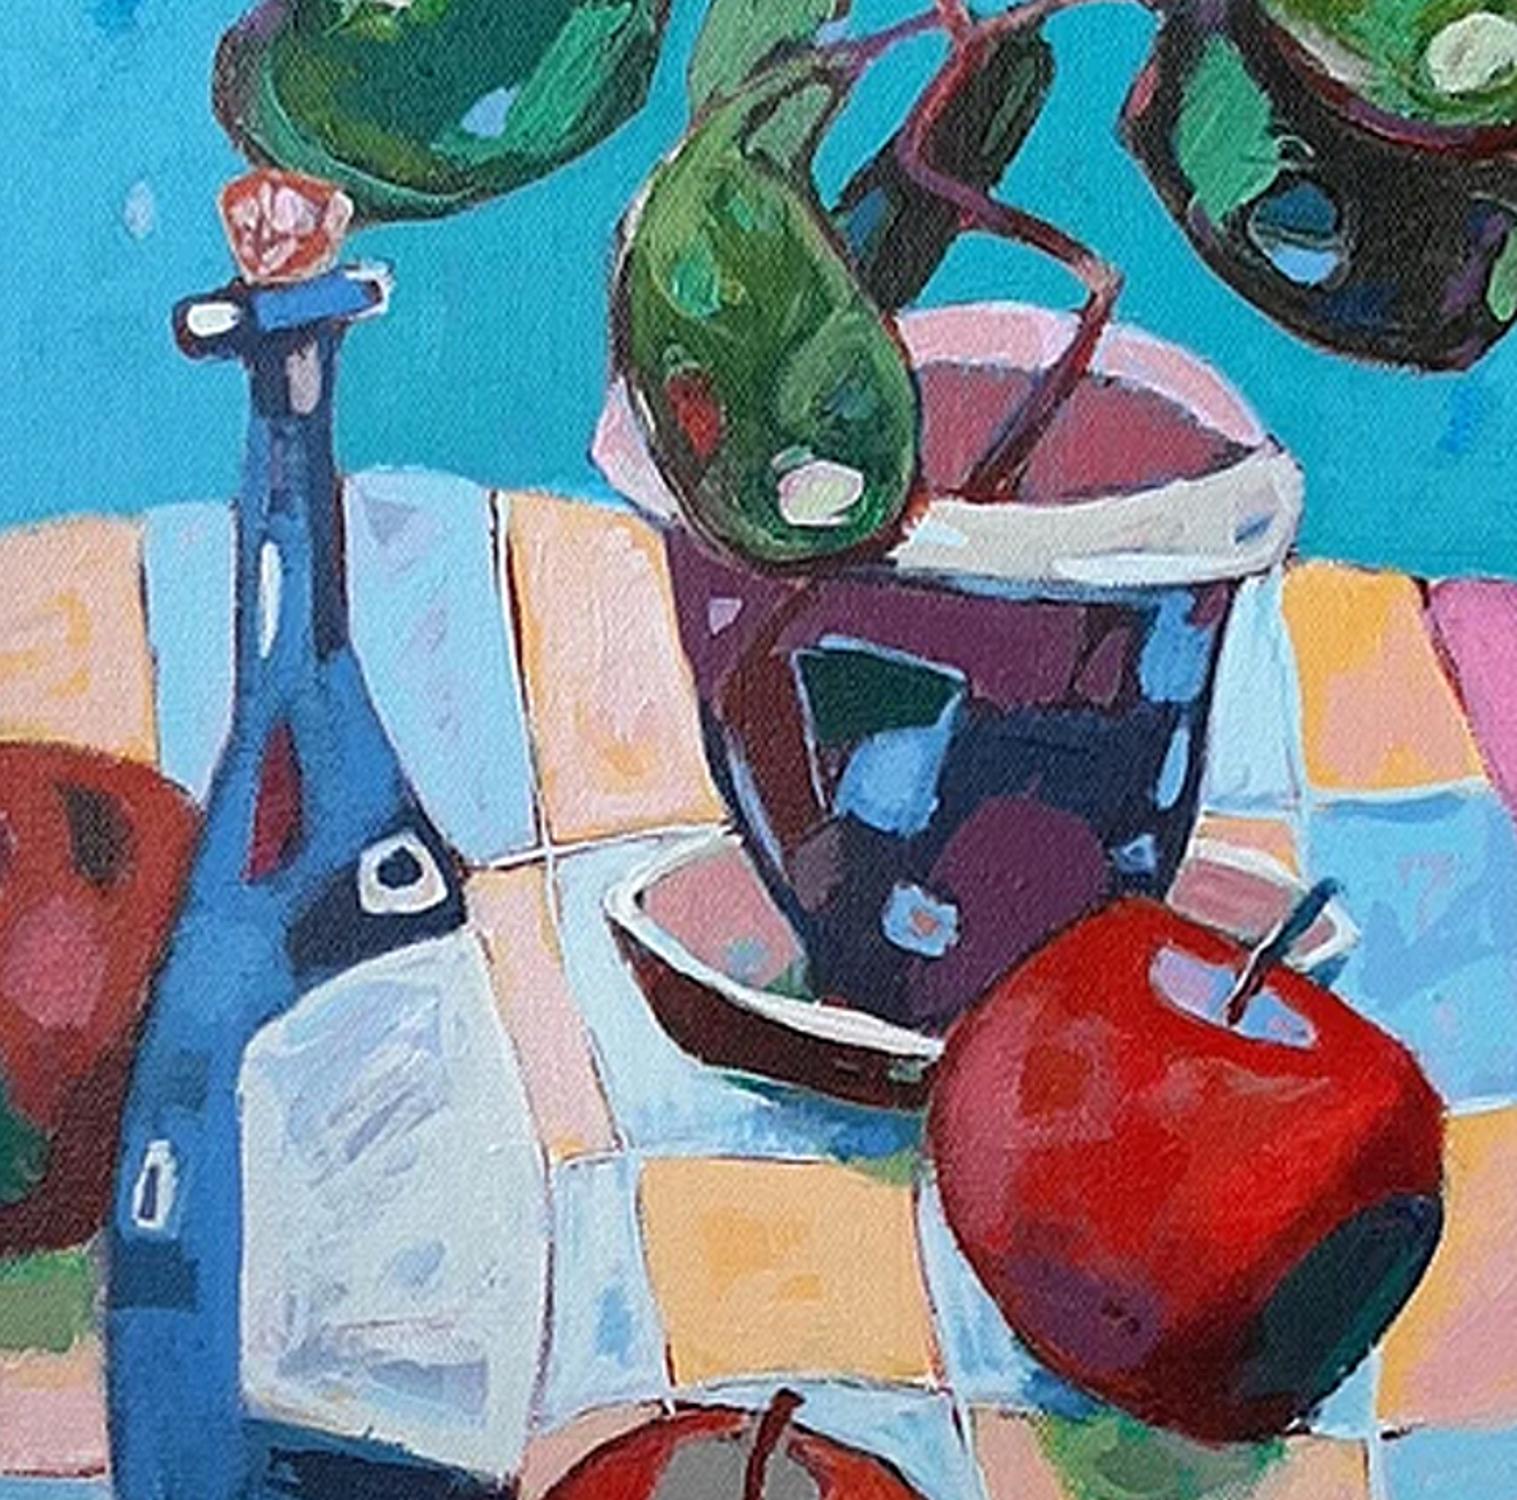 Wine & Red Apples - Colourful, Patterned Still Life: Acrylic on Canvas - Painting by Ania Pieniazek